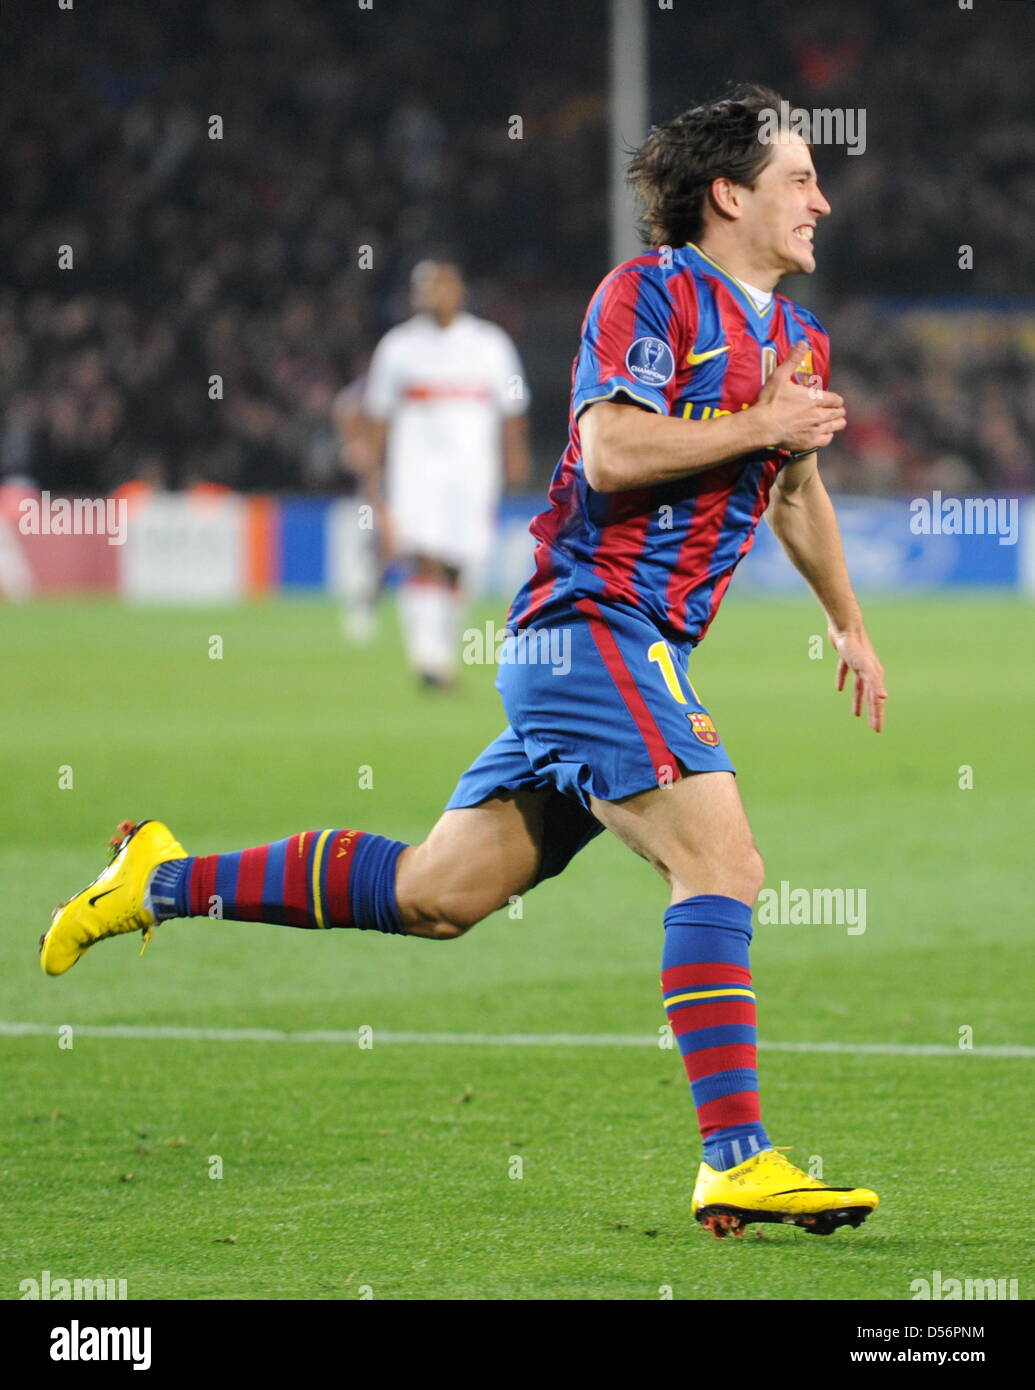 Barcelona's Lionel Messi celebrates his goal during UEFA Champions League round of 16 match FC Barcelona vs VfB Stuttgart at Camp Nou stadium of Barcelona, Spain, 17 March 2010. Barcelona thrashed Stuttgart 4-0 in the second leg and moves up to quarter-finals winning 5-1 on aggregate. Photo: Bernd Weissbrod Stock Photo